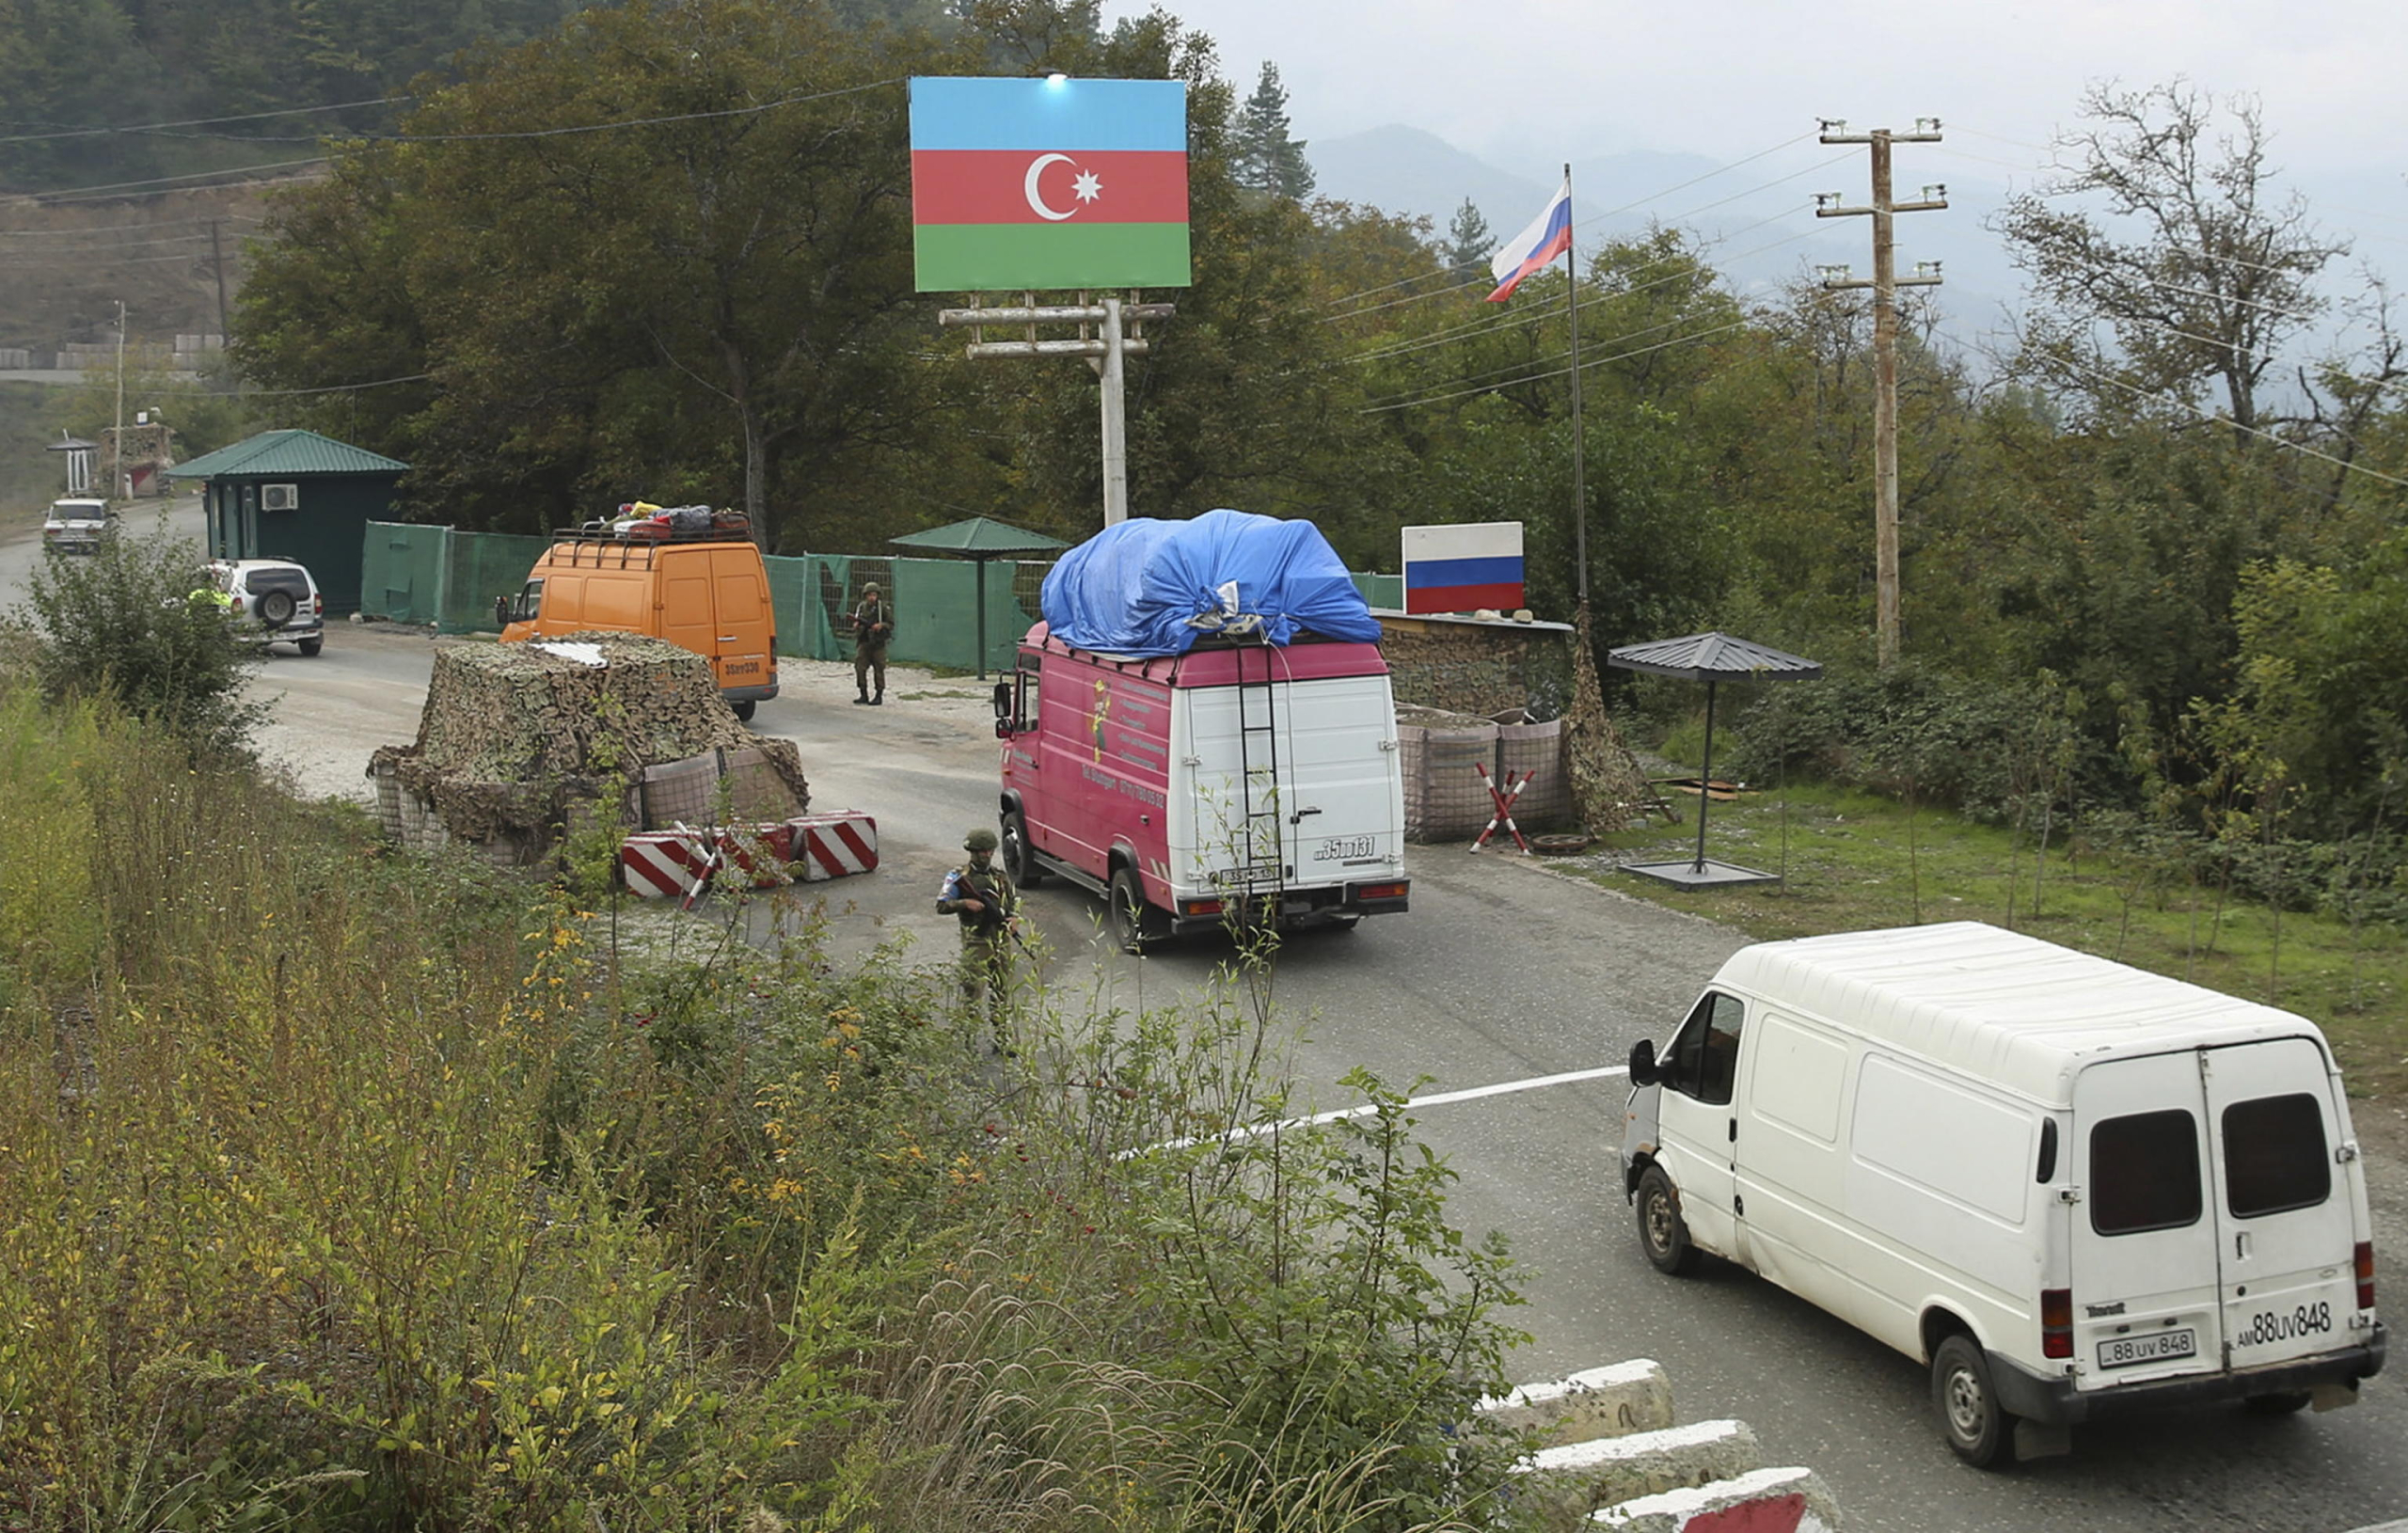 epa10883970 Ethnic Armenian flee Karabakh for Armenia at the Lachin checkpoint controlled by Russian peackeepers and Azeri border guards, Azerbaijan, 26 September 2023. Azerbaijan on 19 September 2023 launched a brief military offensive on the contested region of Nagorno-Karabakh, a breakaway enclave that is home to some 120,000 ethnic Armenians. Following a ceasefire agreed on 20 September 2023, Azerbaijan opened all checkpoints with Armenia for the unimpeded exit of civilians from the disputed territory. The Armenian government announced the evacuation of more than 19,000 local residents from Nagorno-Karabakh, and a humanitarian center has been set up in the village of Kornidzor near the so-called Lachin corridor, the main route between Armenia and the breakaway region. Russian peacekeepers escorted convoys with civilians leaving Nagorno-Karabakh for Armenia, the Russian defense ministry said.  EPA/ROMAN ISMAYILOV